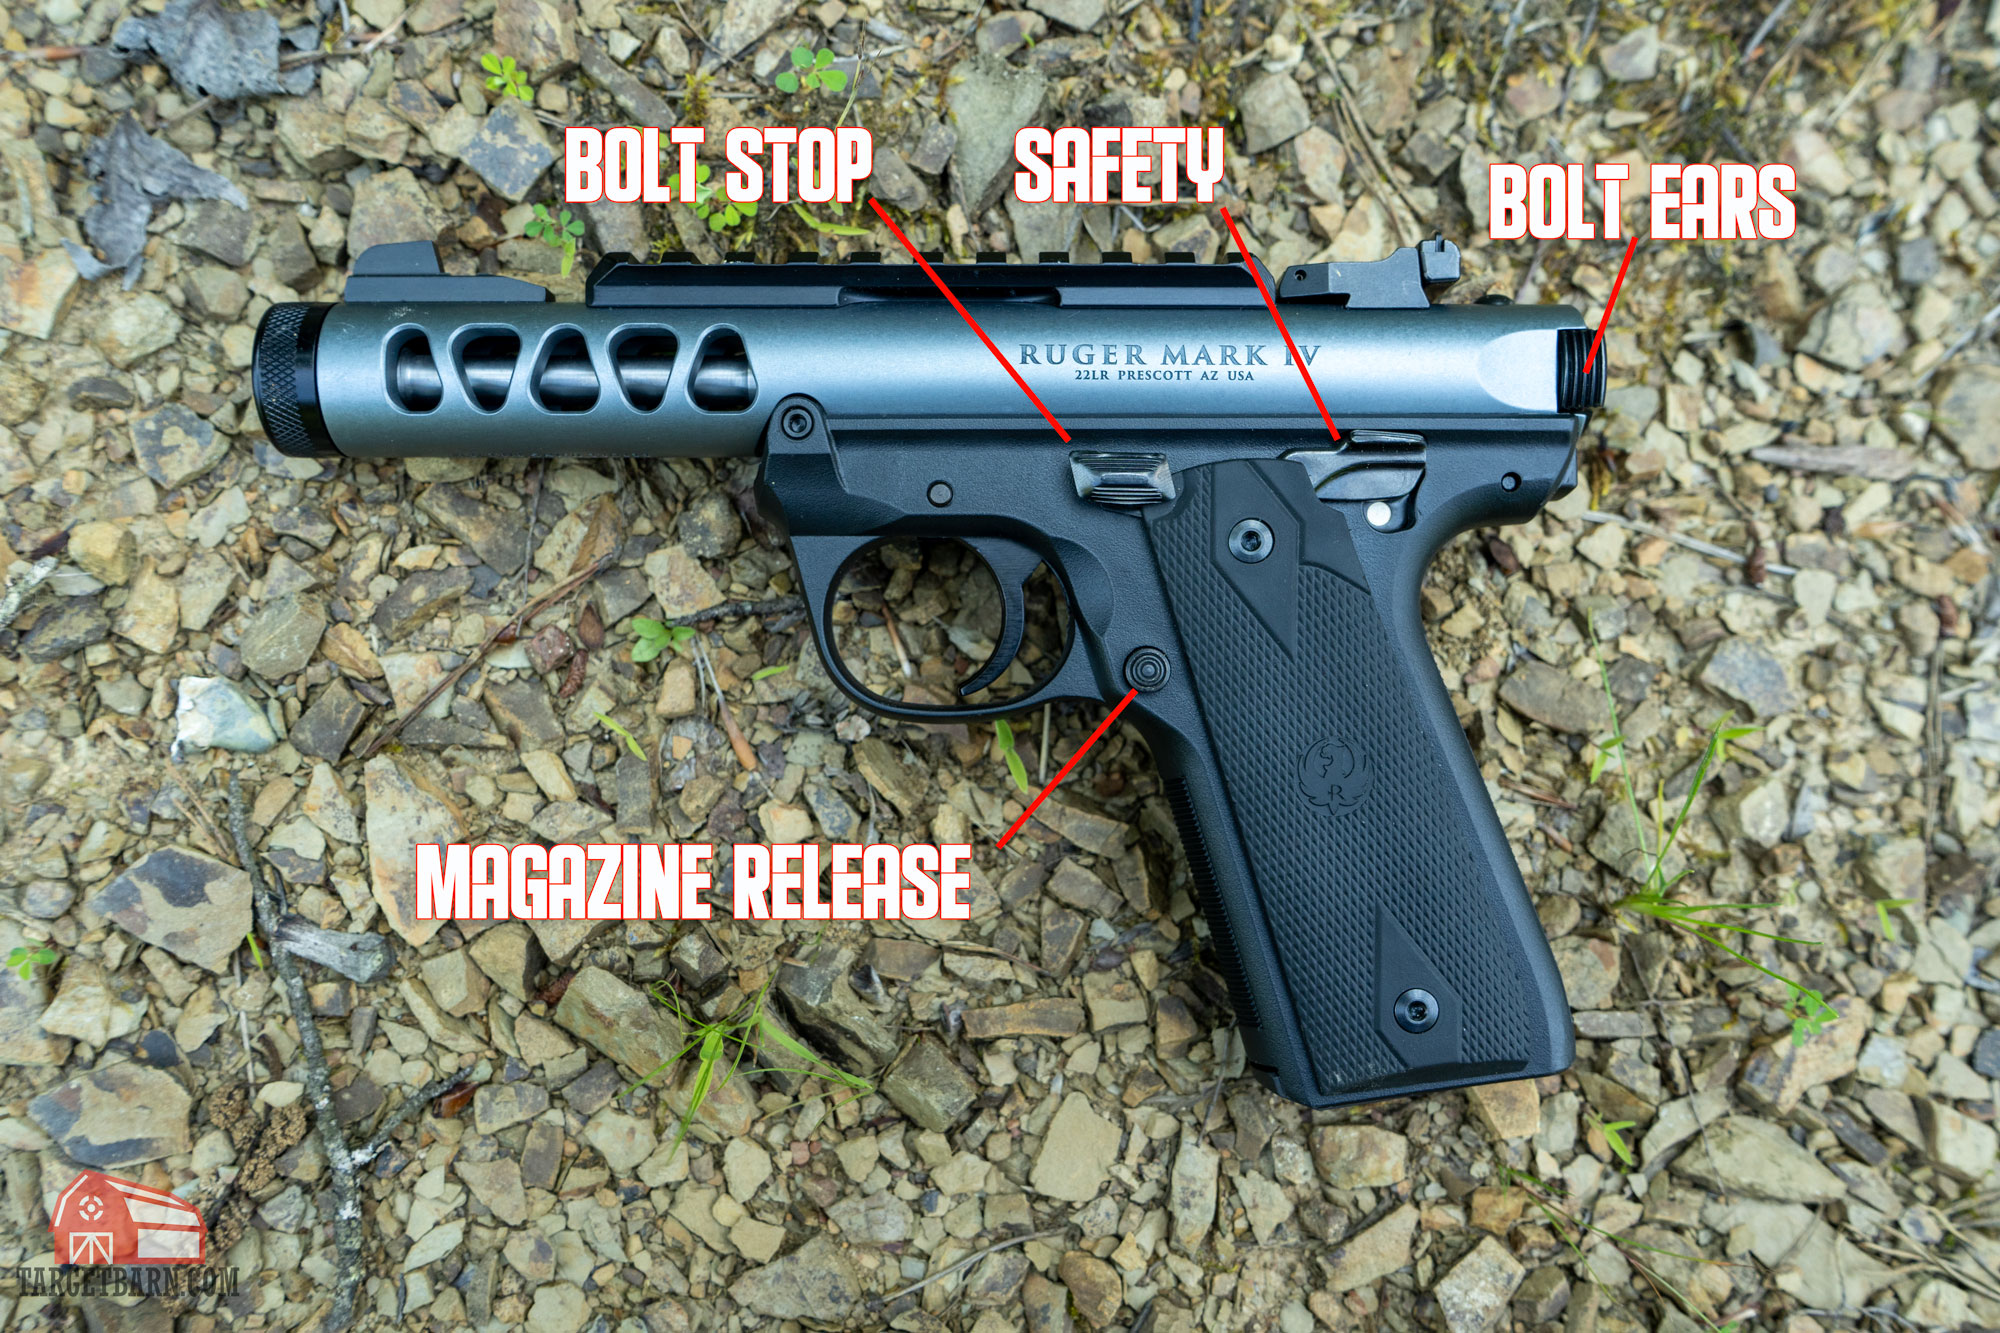 a mark iv lite with the bolt stop, safety, bolt ears, and magazine release controls labeled